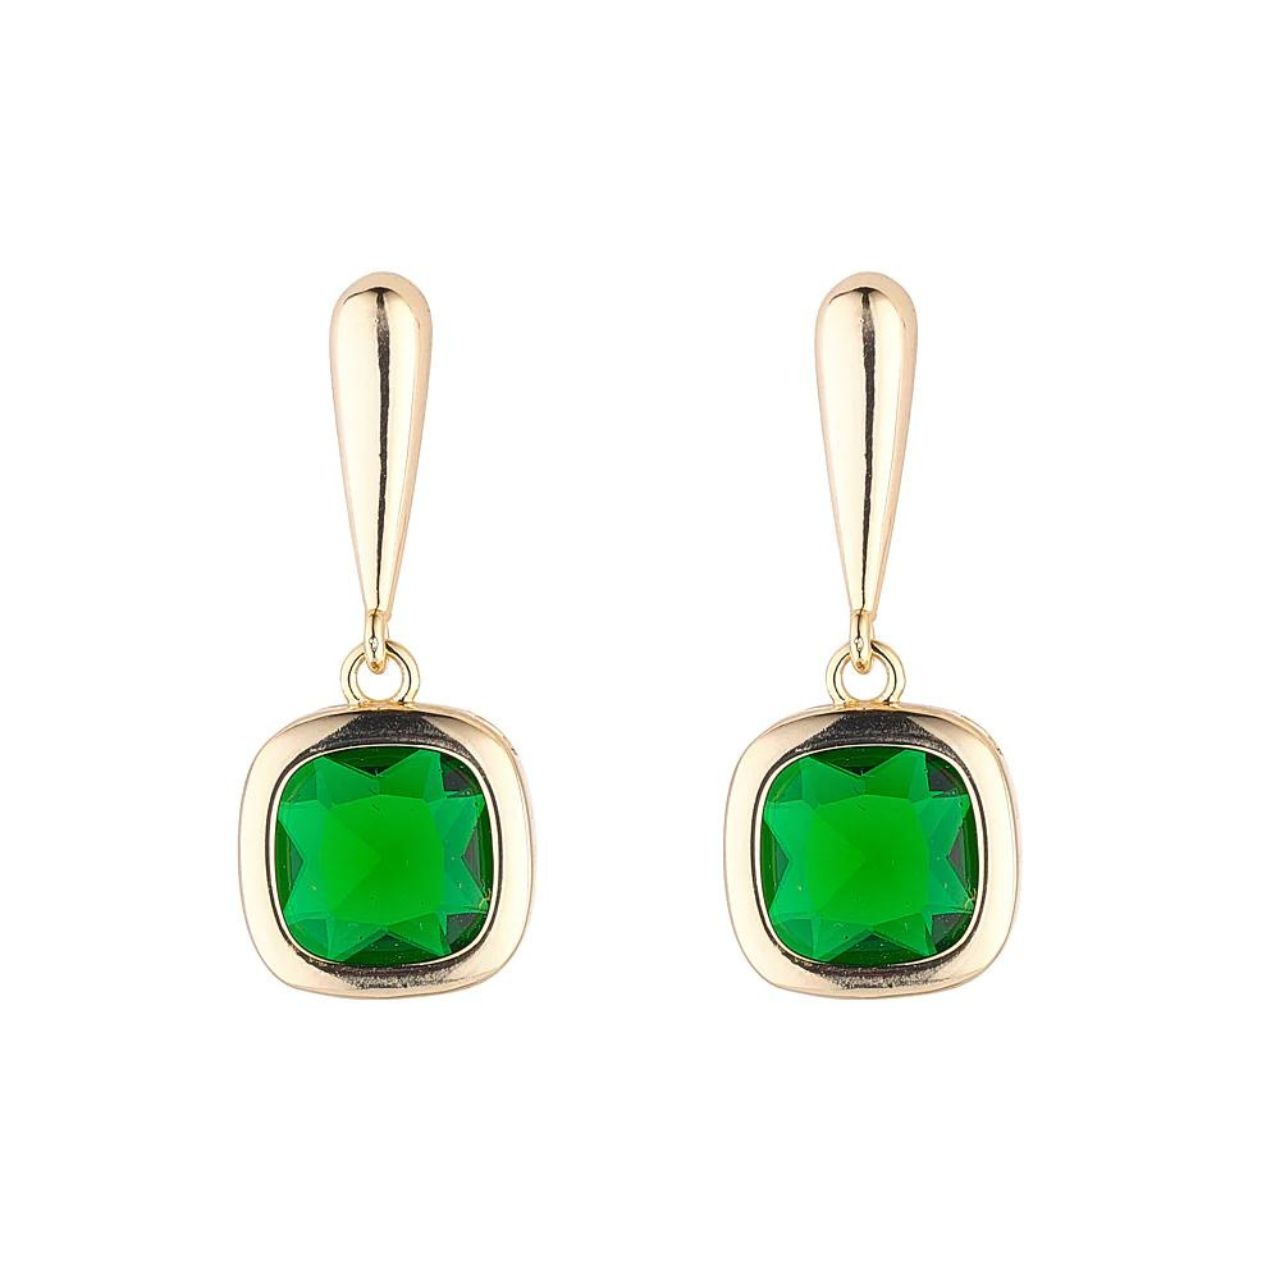 Kairi Earrings Gold Plated Drop Earrings With Green Stone by Knight & Day  Crafted from premium gold-plated metal and featuring a vibrant green stone, the Knight & Day Kairi earrings are an elegant accessory for any occasion.